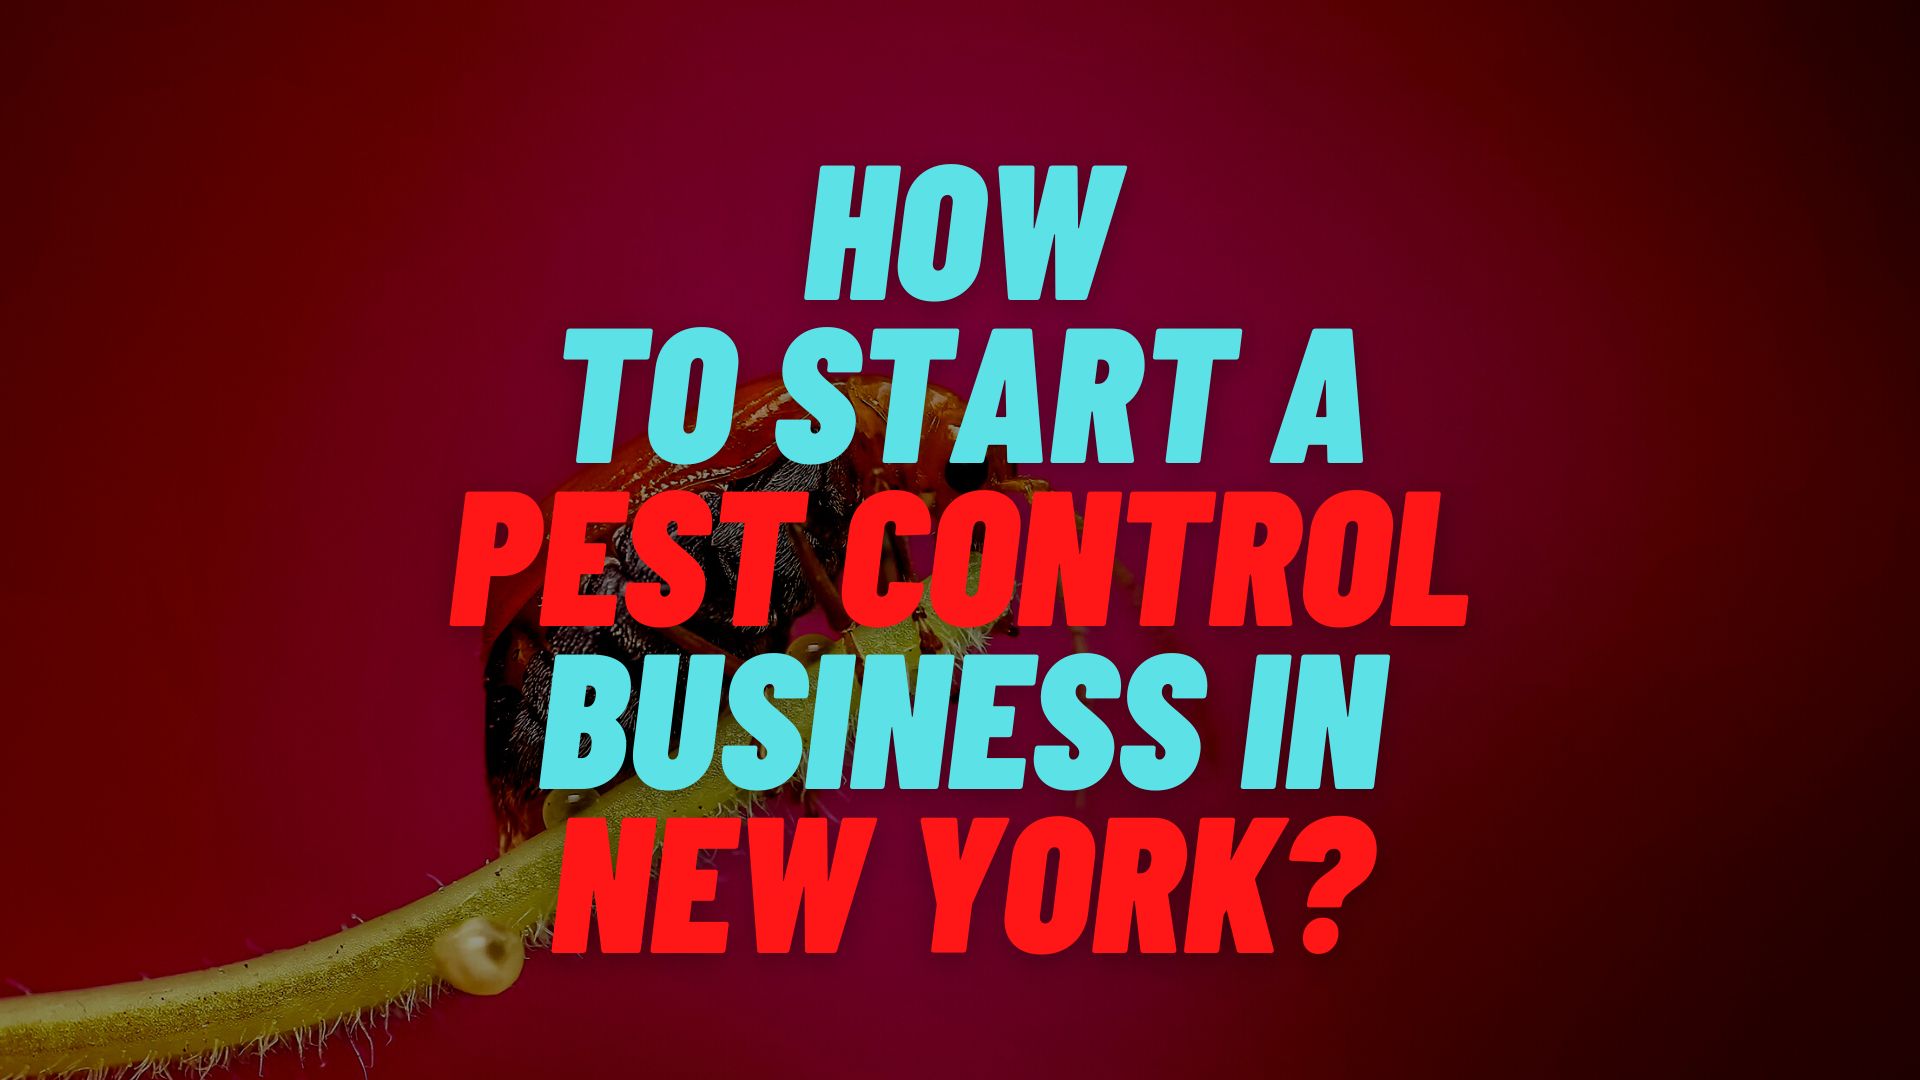 How to start a pest control business in New York?